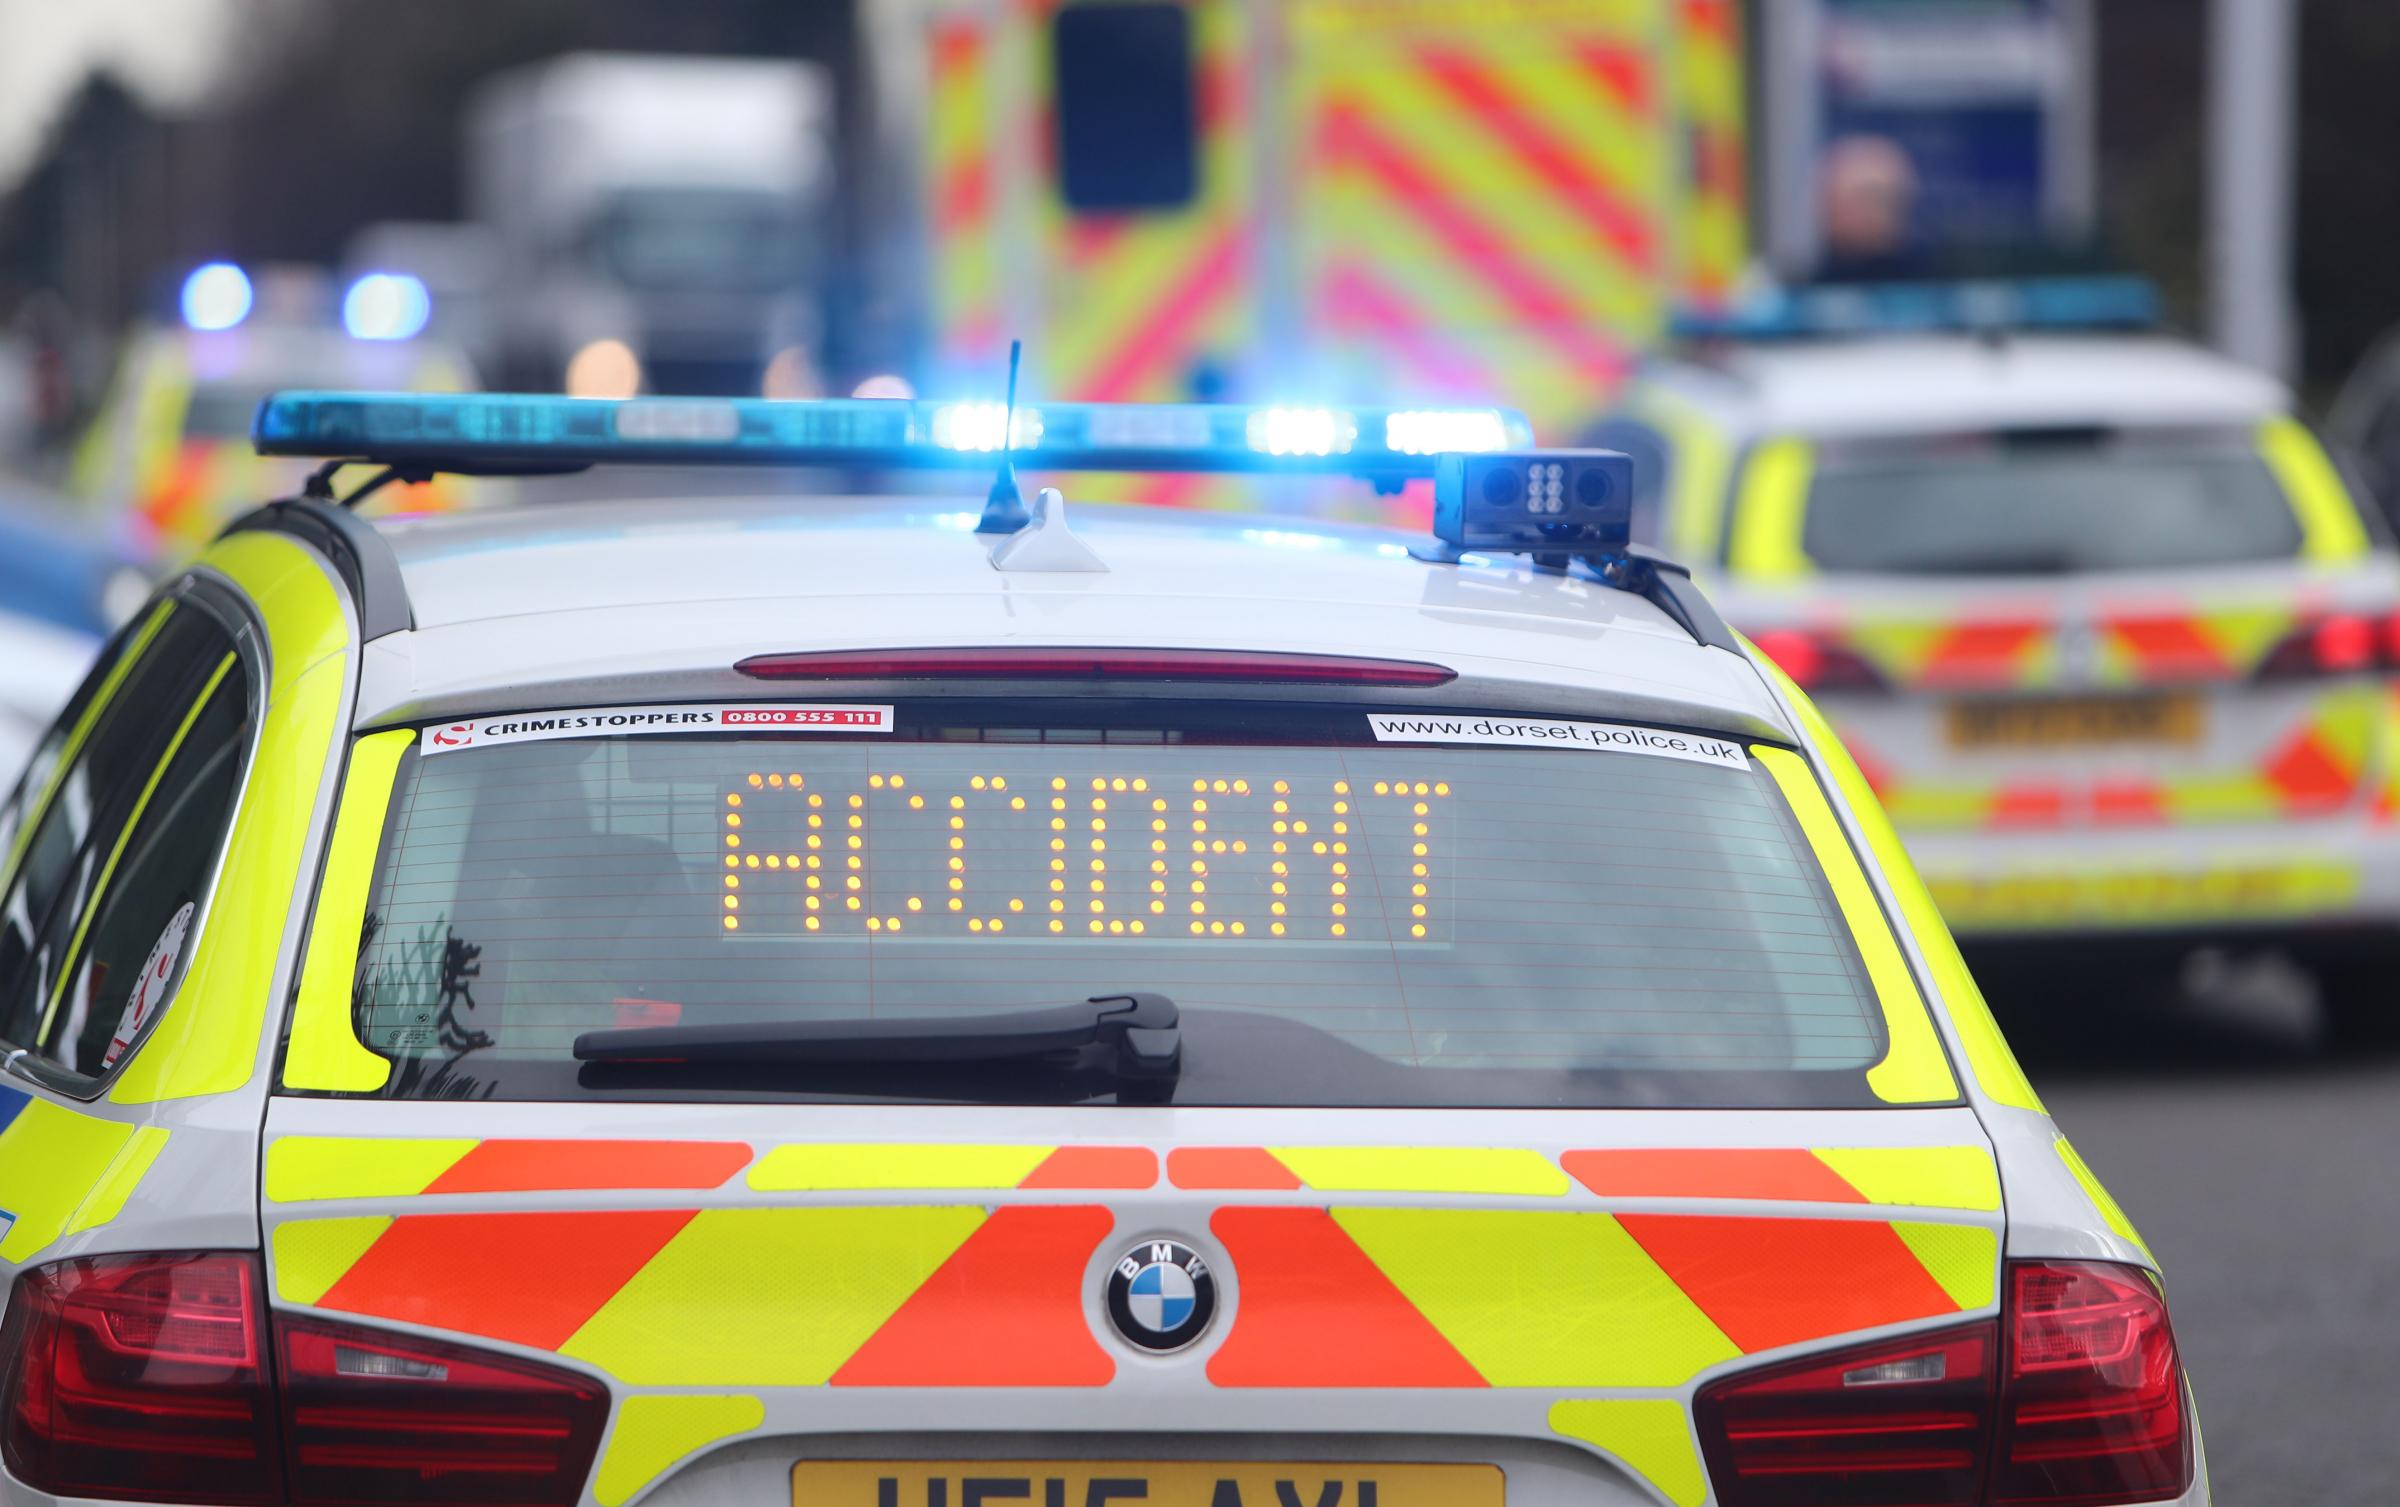 A351 closed again due to police incident